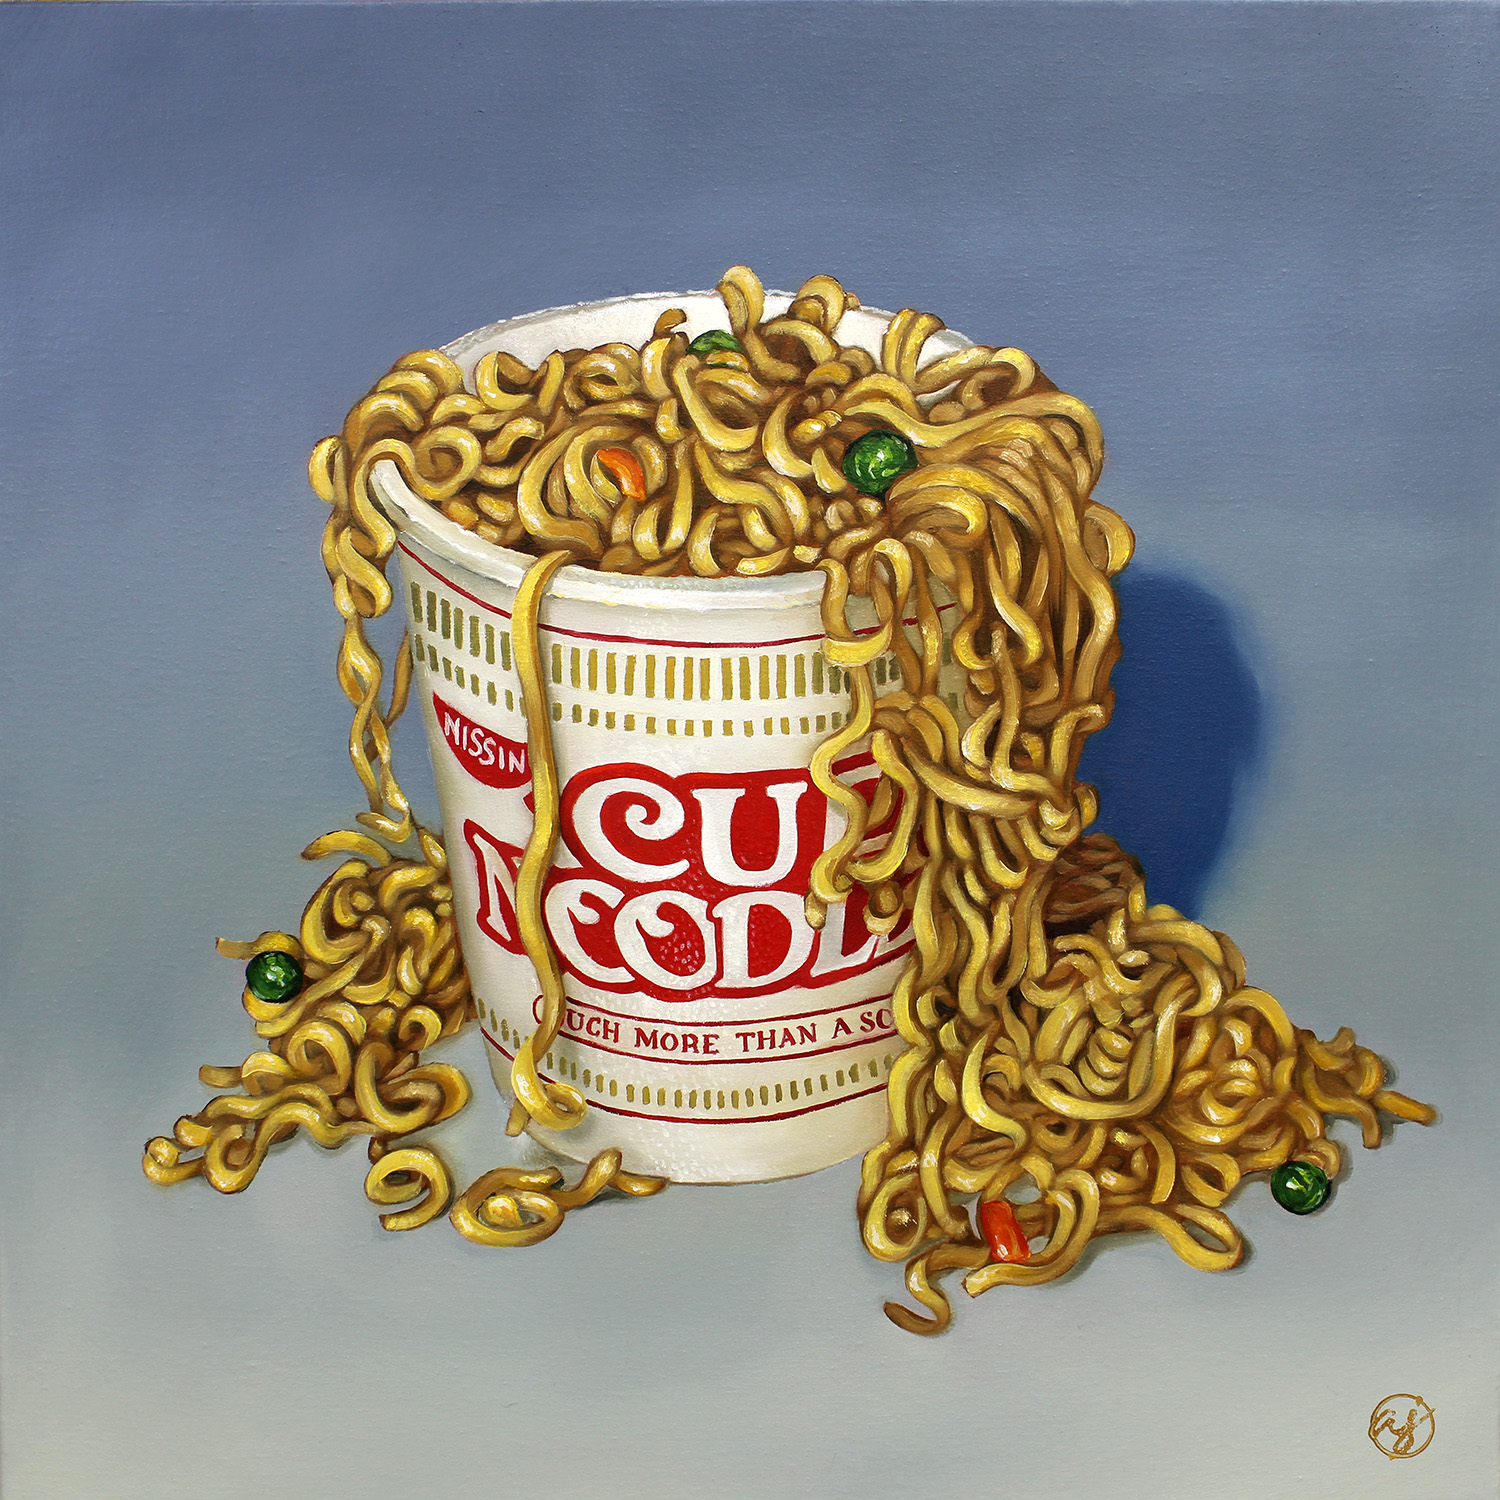 "Cup-O-Noodles" 16x16 Original Oil Painting by Abra Johnson